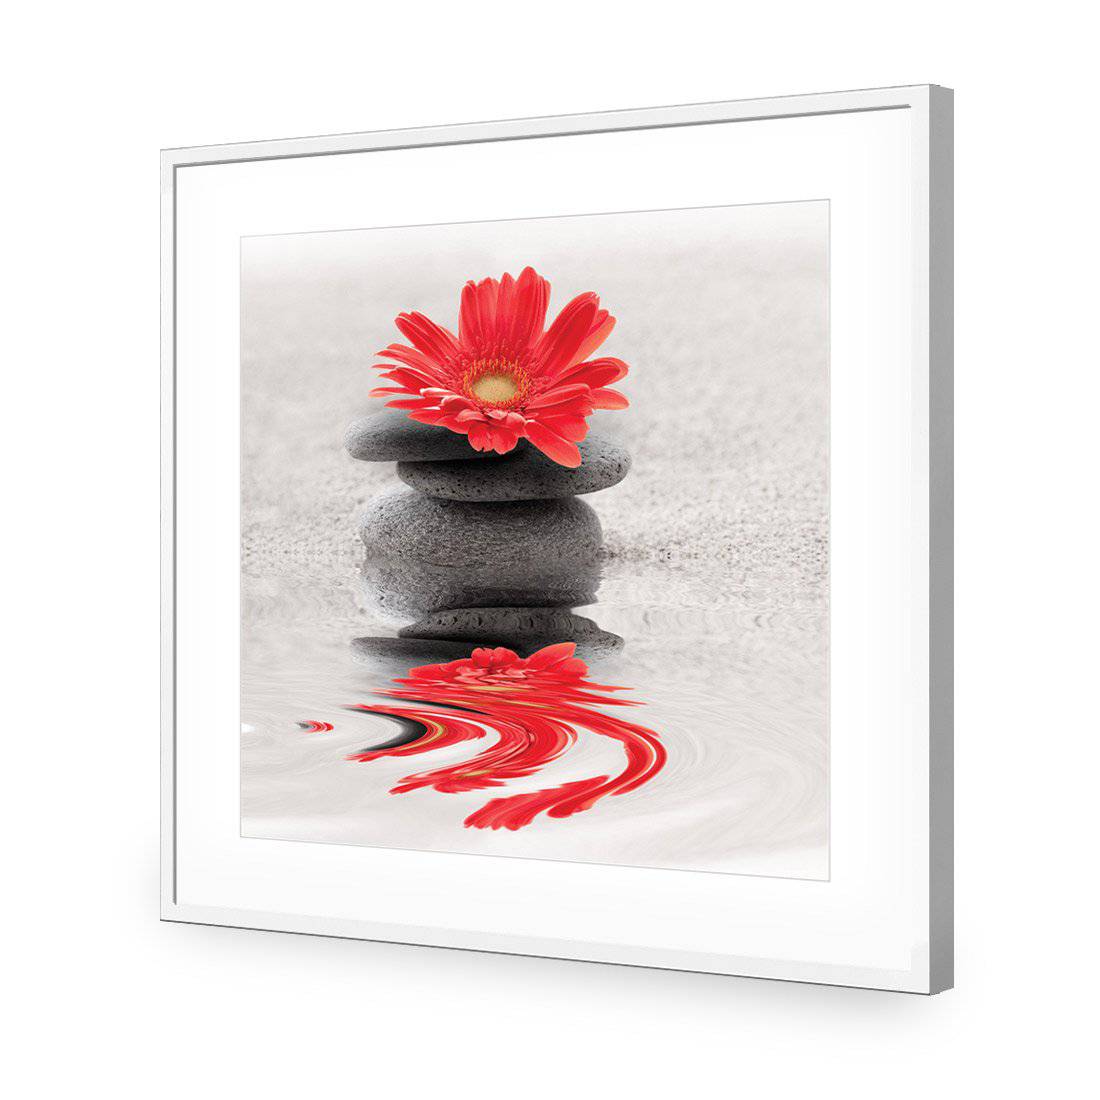 Red Flower Reflection, Square-Acrylic-Wall Art Design-With Border-Acrylic - White Frame-37x37cm-Wall Art Designs